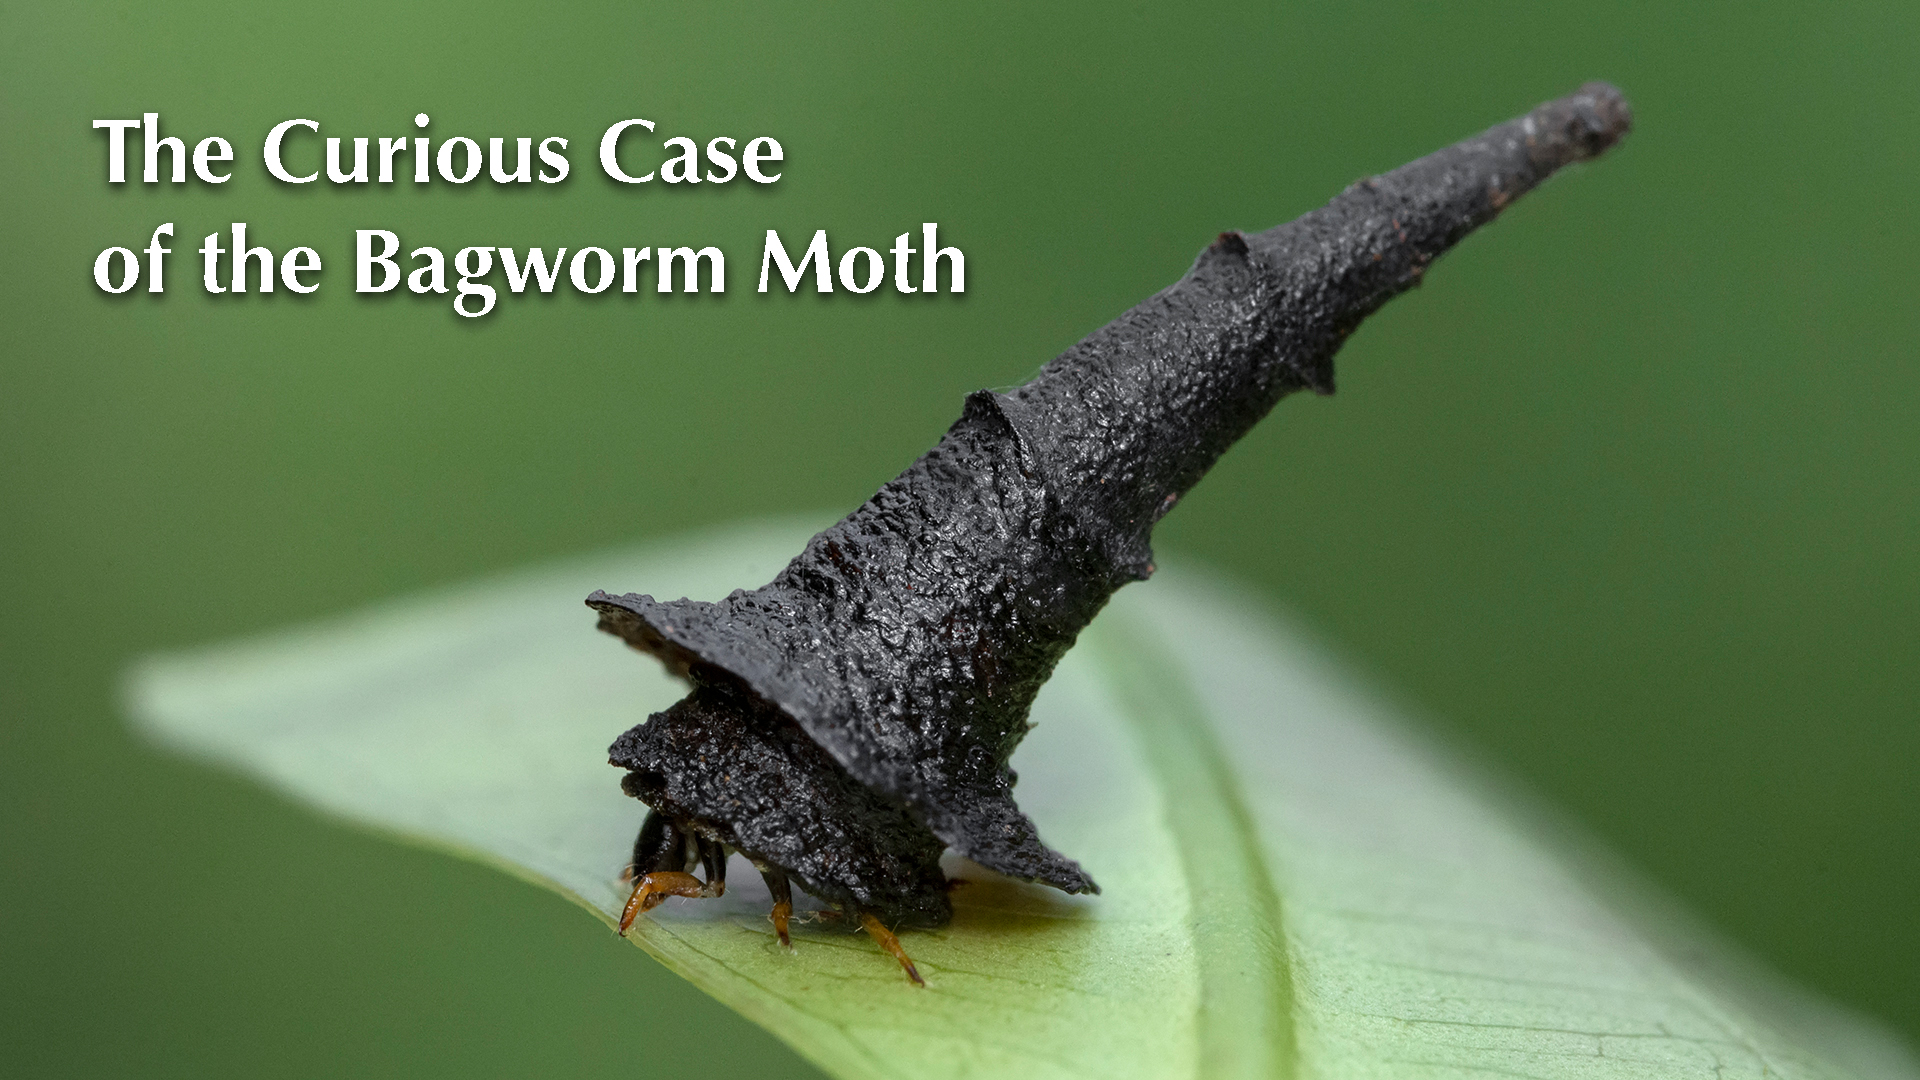 The Curious Case of the Bagworm Moth